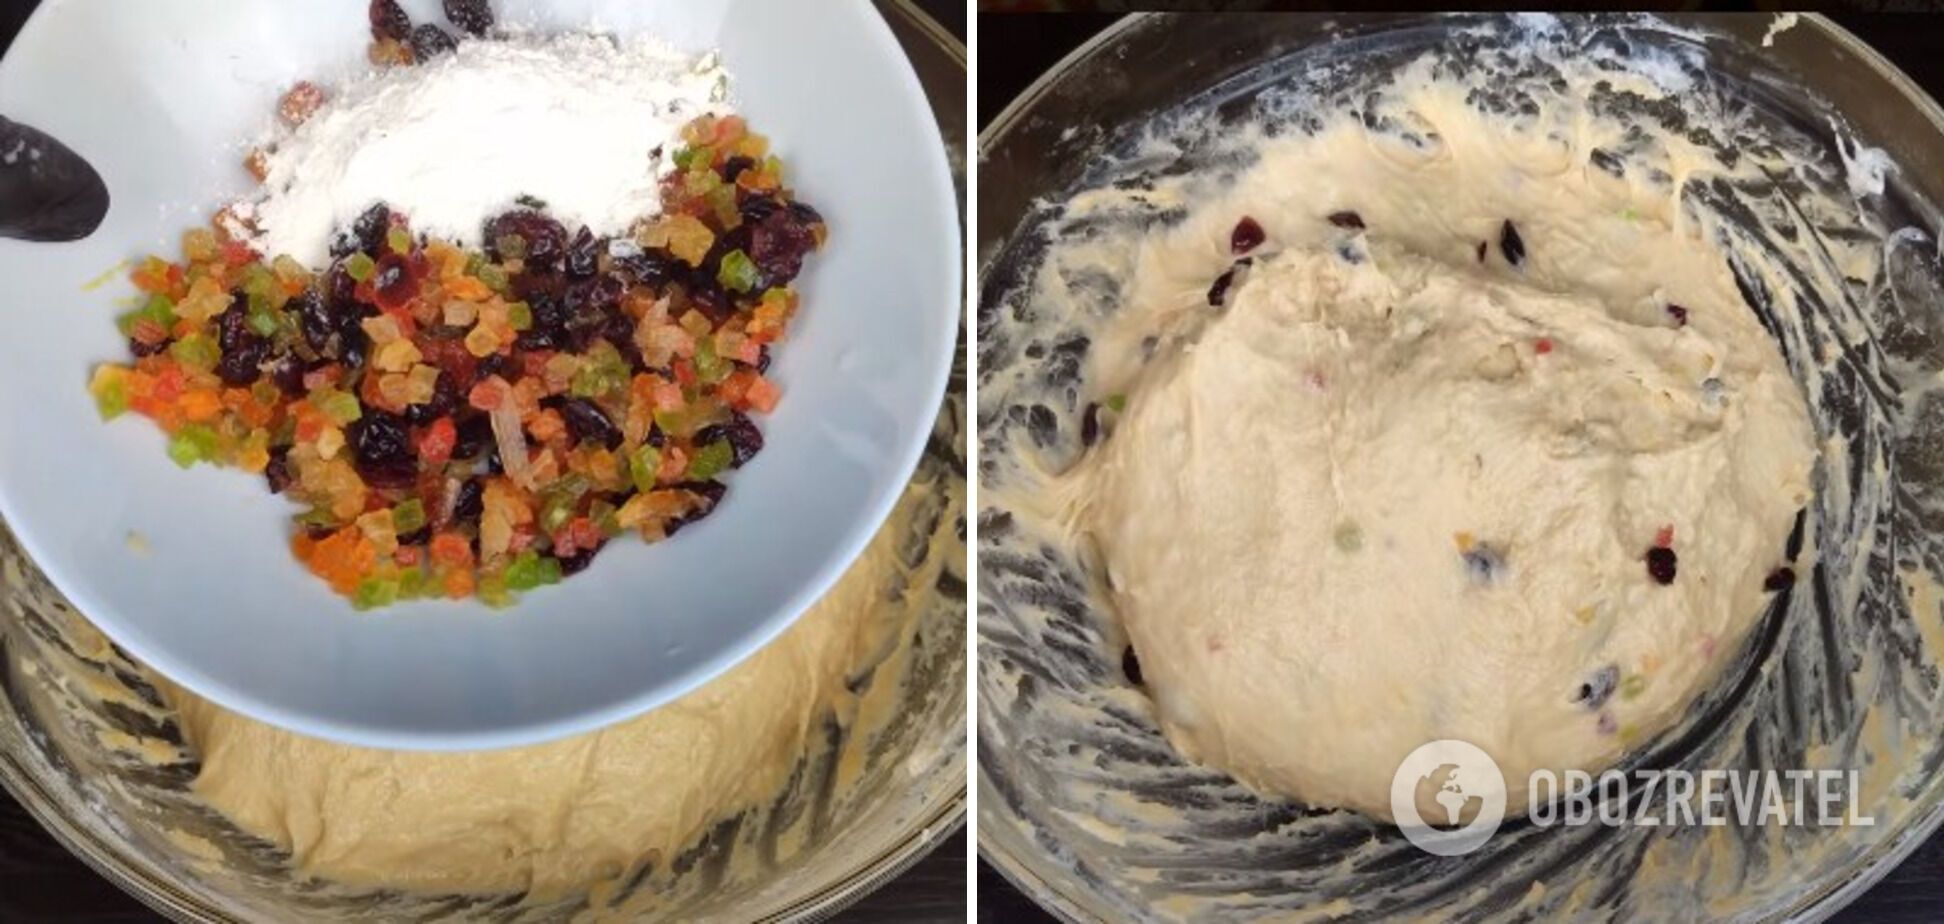 Dough with candied fruit